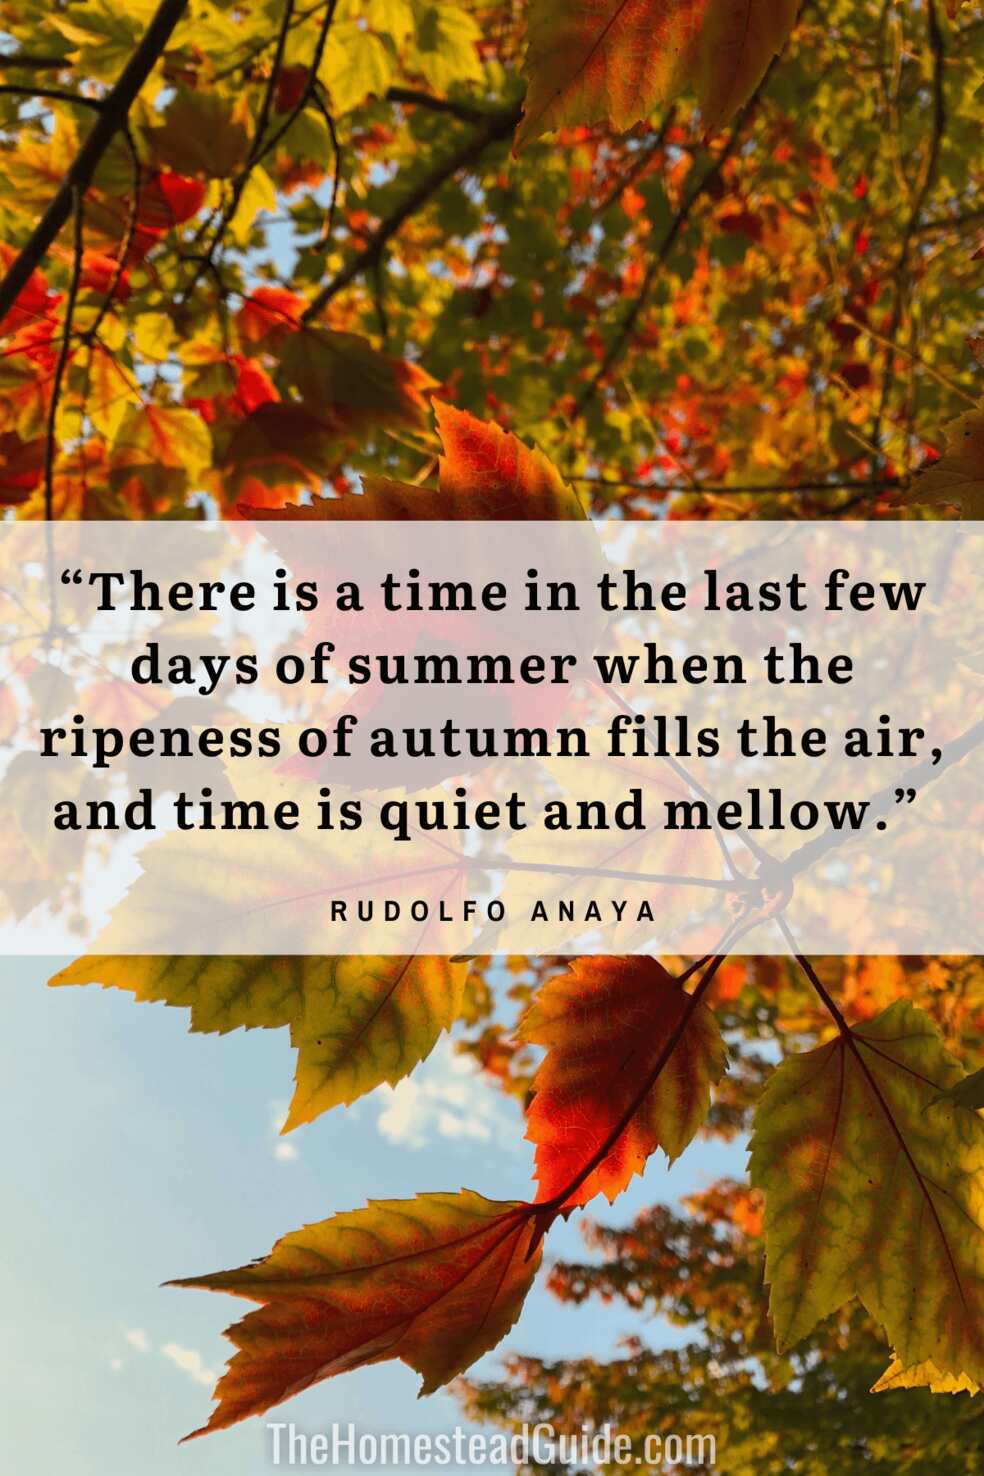 There is a time in the last few days of summer when the ripeness of autumn fills the air, and time is quiet and mellow.